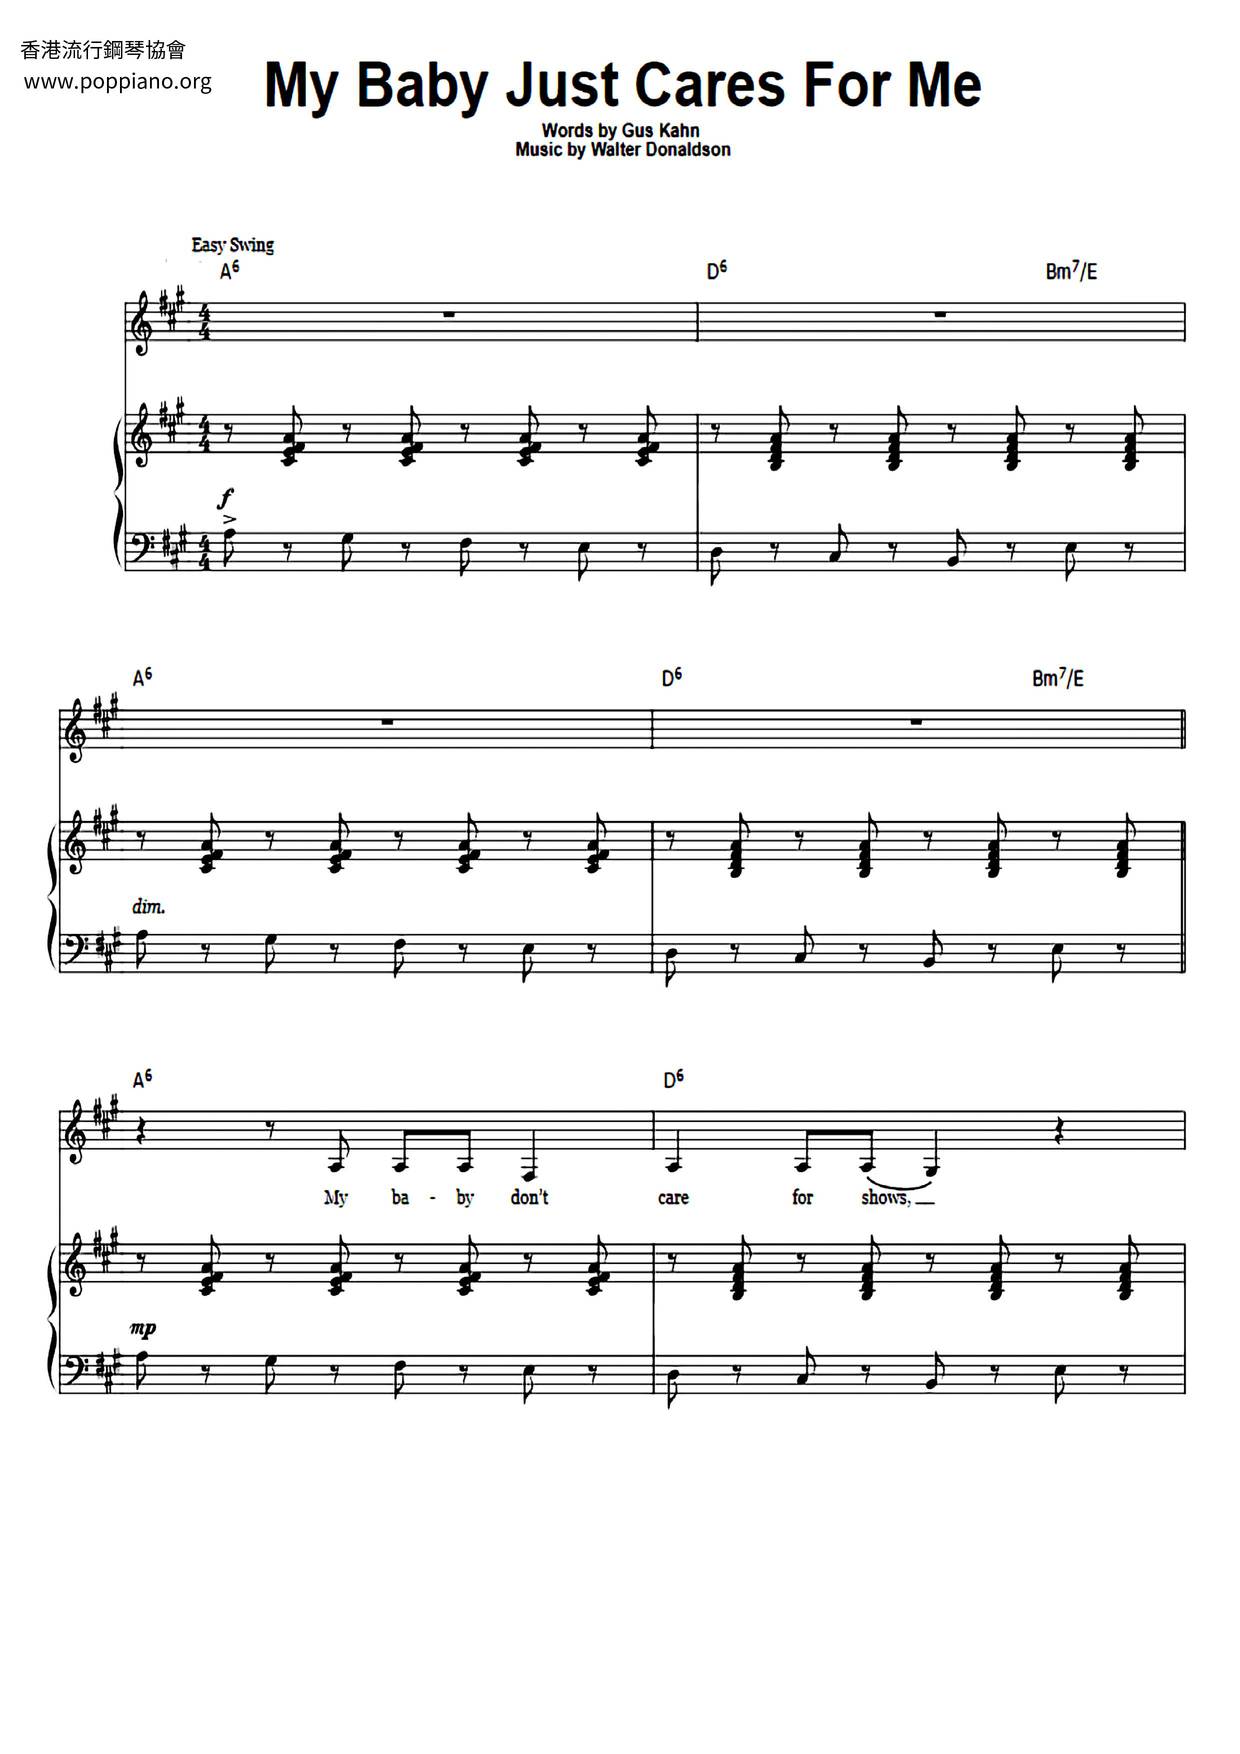 My Baby Just Cares For Me Sheet Music Piano Score Free Pdf Download Hk Pop Piano Academy